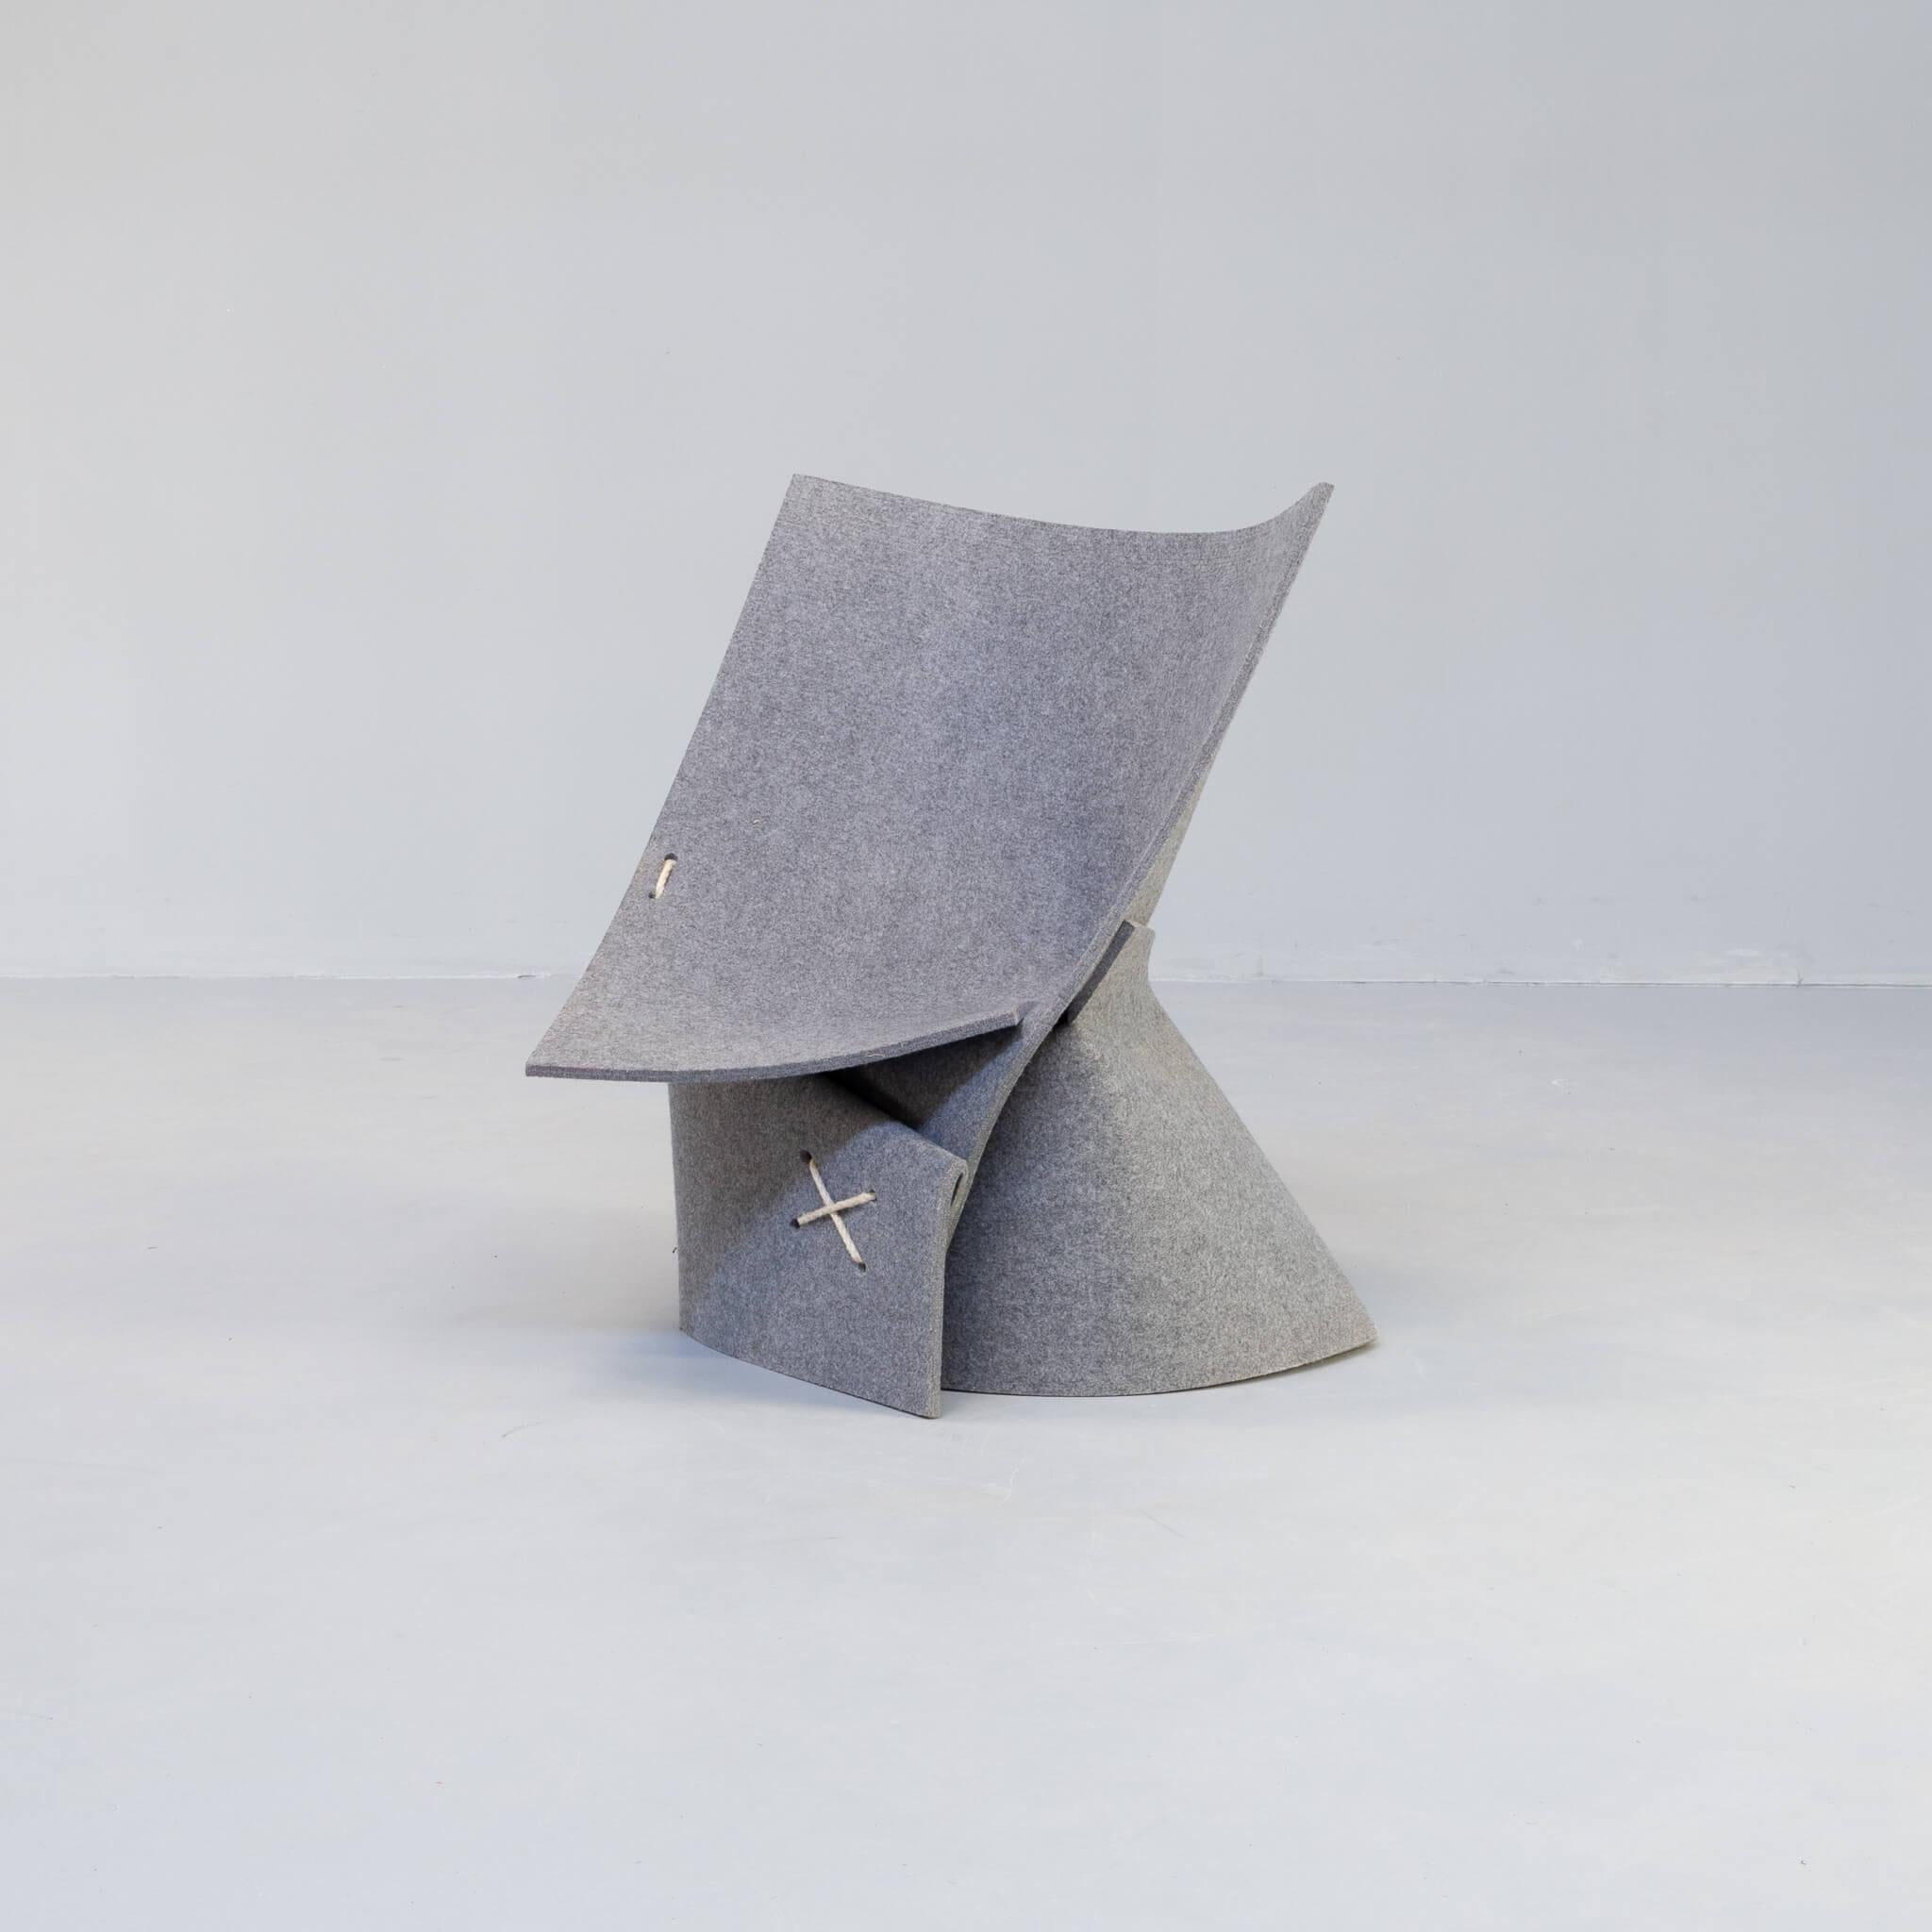 Lounge armchair FF1 is a design by the Belgian designers James van Vossel and Tom de Vrieze, who marketed this chair as Fox and Freeze. The chair is made of 1 sheet of synthetic felt with a self-supporting structure. The chair is light in weight but